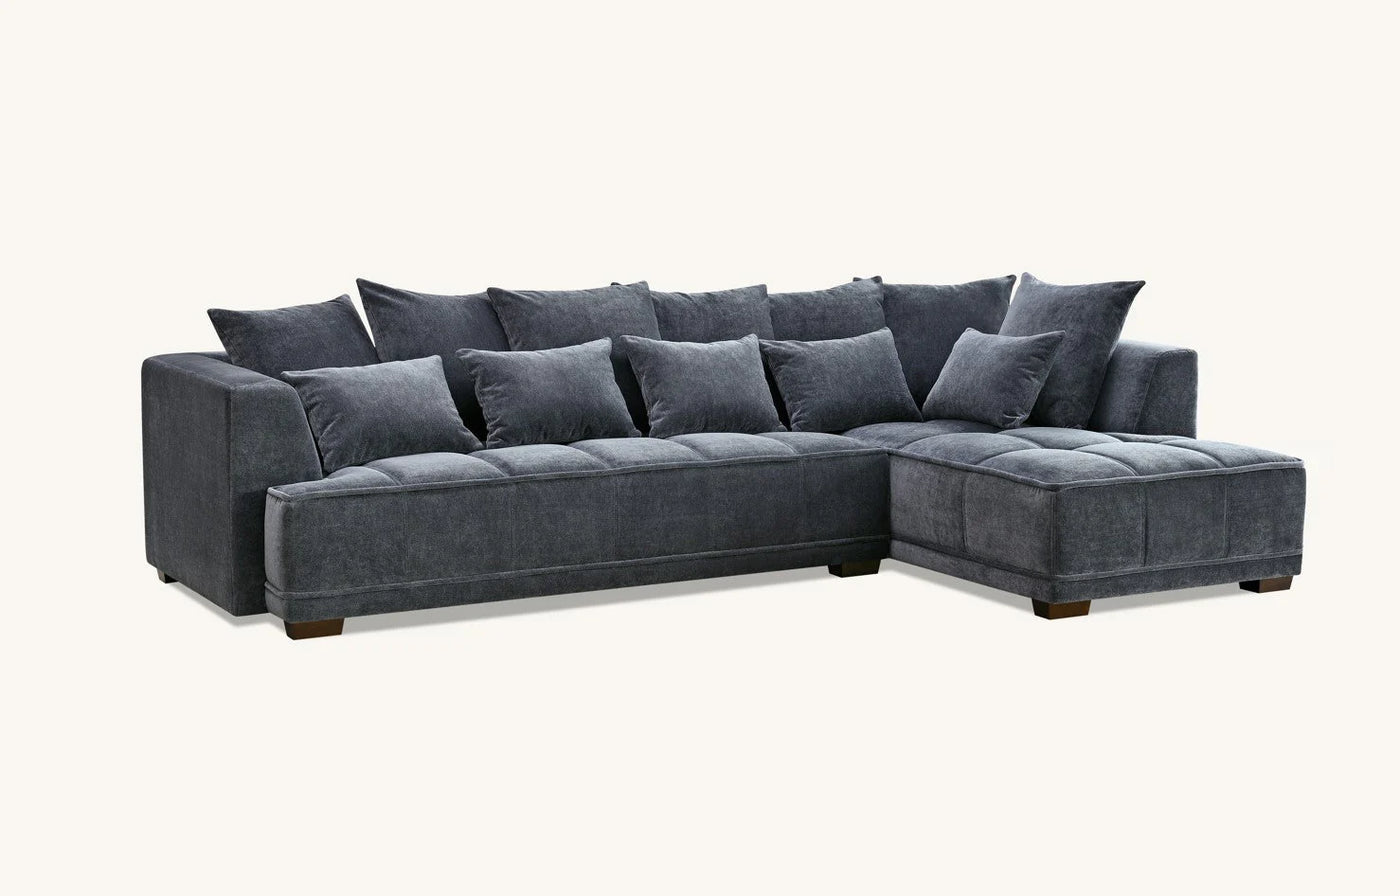 The Gracemary Steel Grey Boucle Right Hand Corner Premium Sofa Steel Boucle Fabric